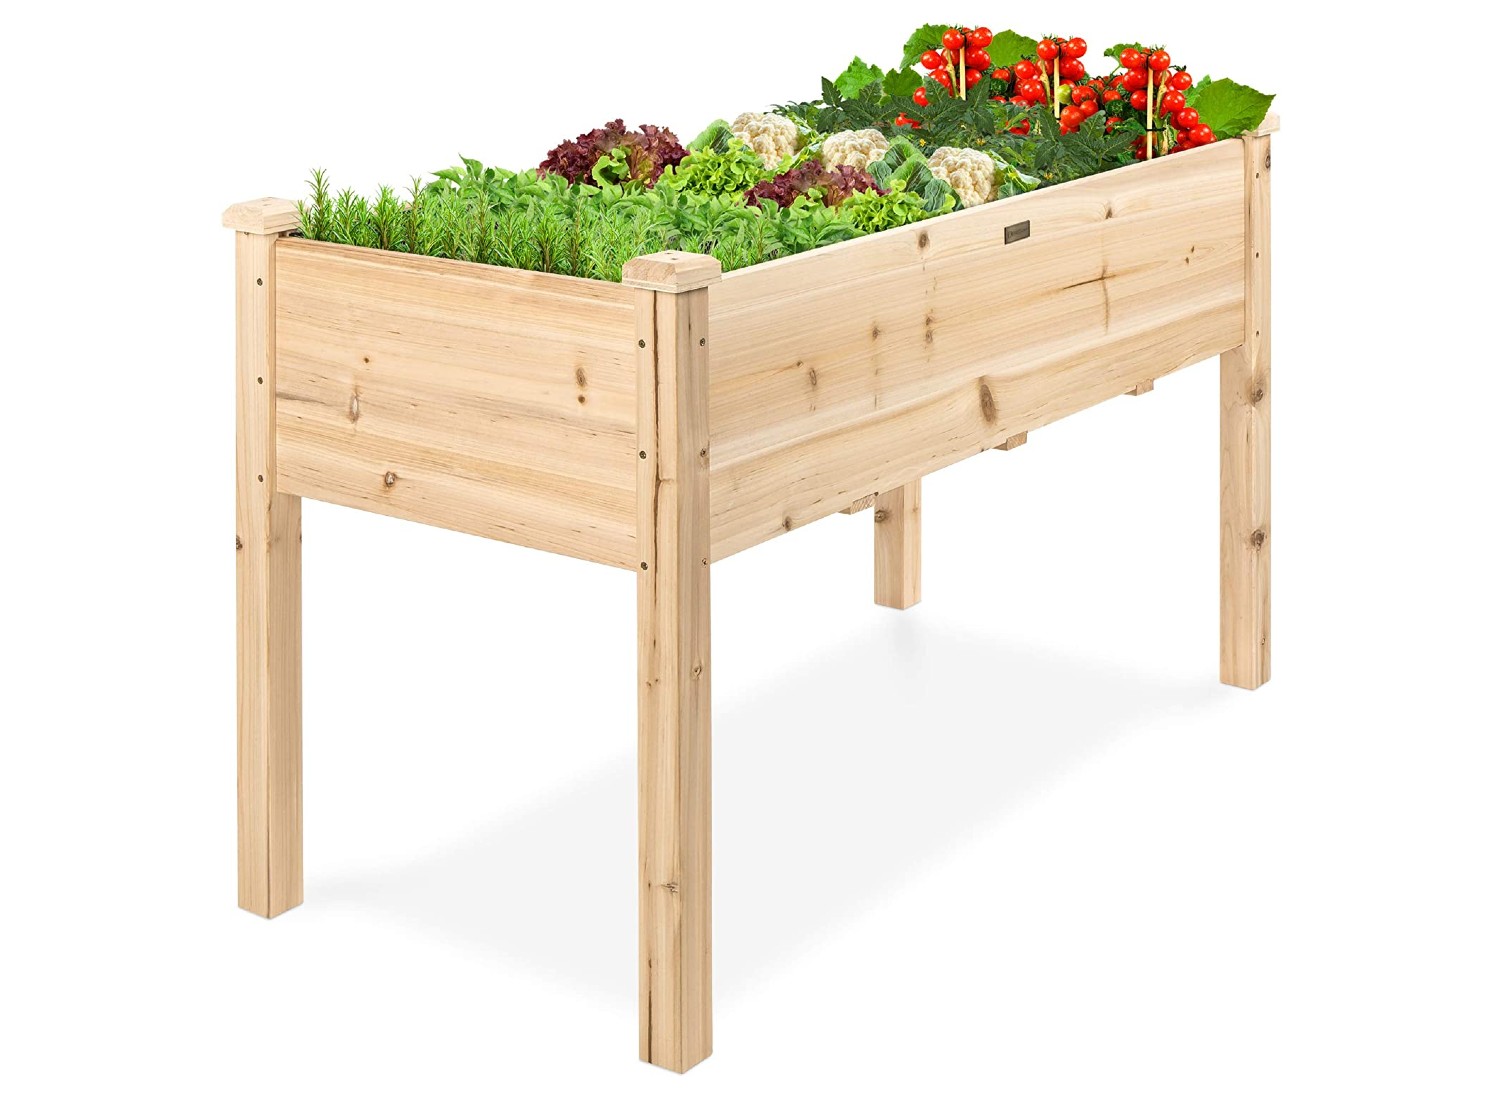 BC Products Raised Garden Bed